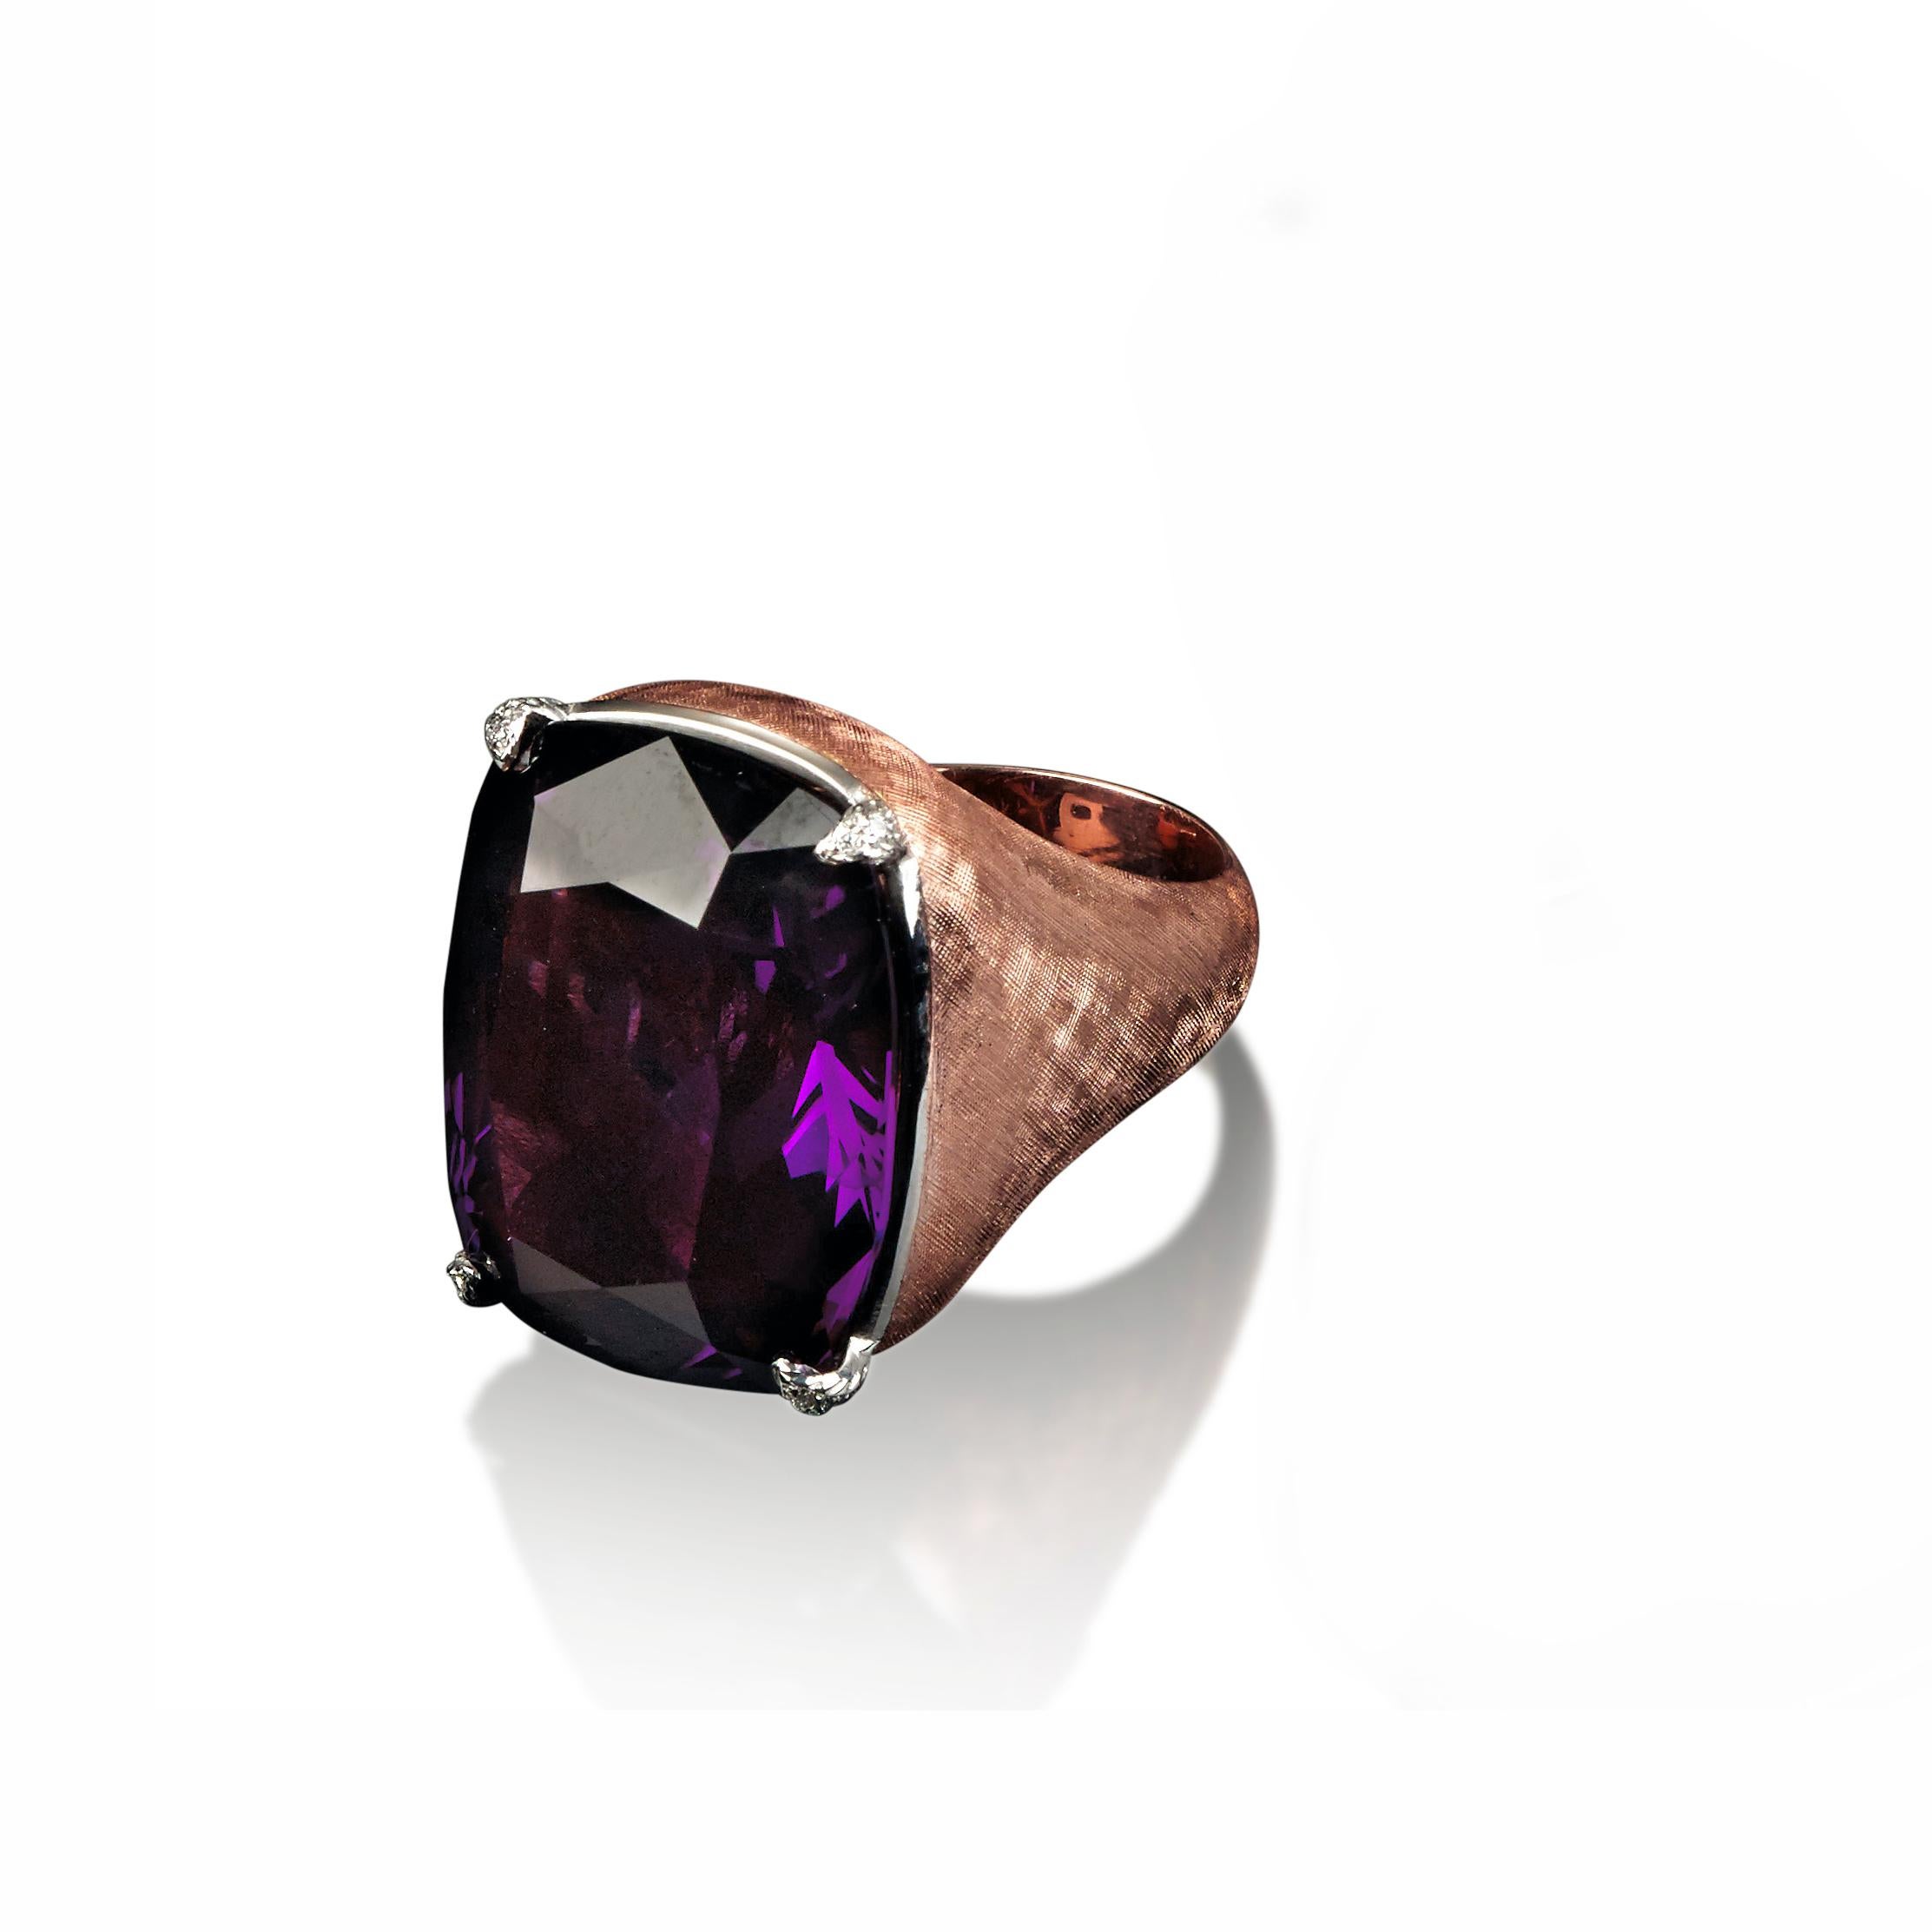 Violetta l18 kt Rose Gold Ring featuring a central Gem Quality Amethyst for 33.60 carats.
Diameter in cm: 1.60